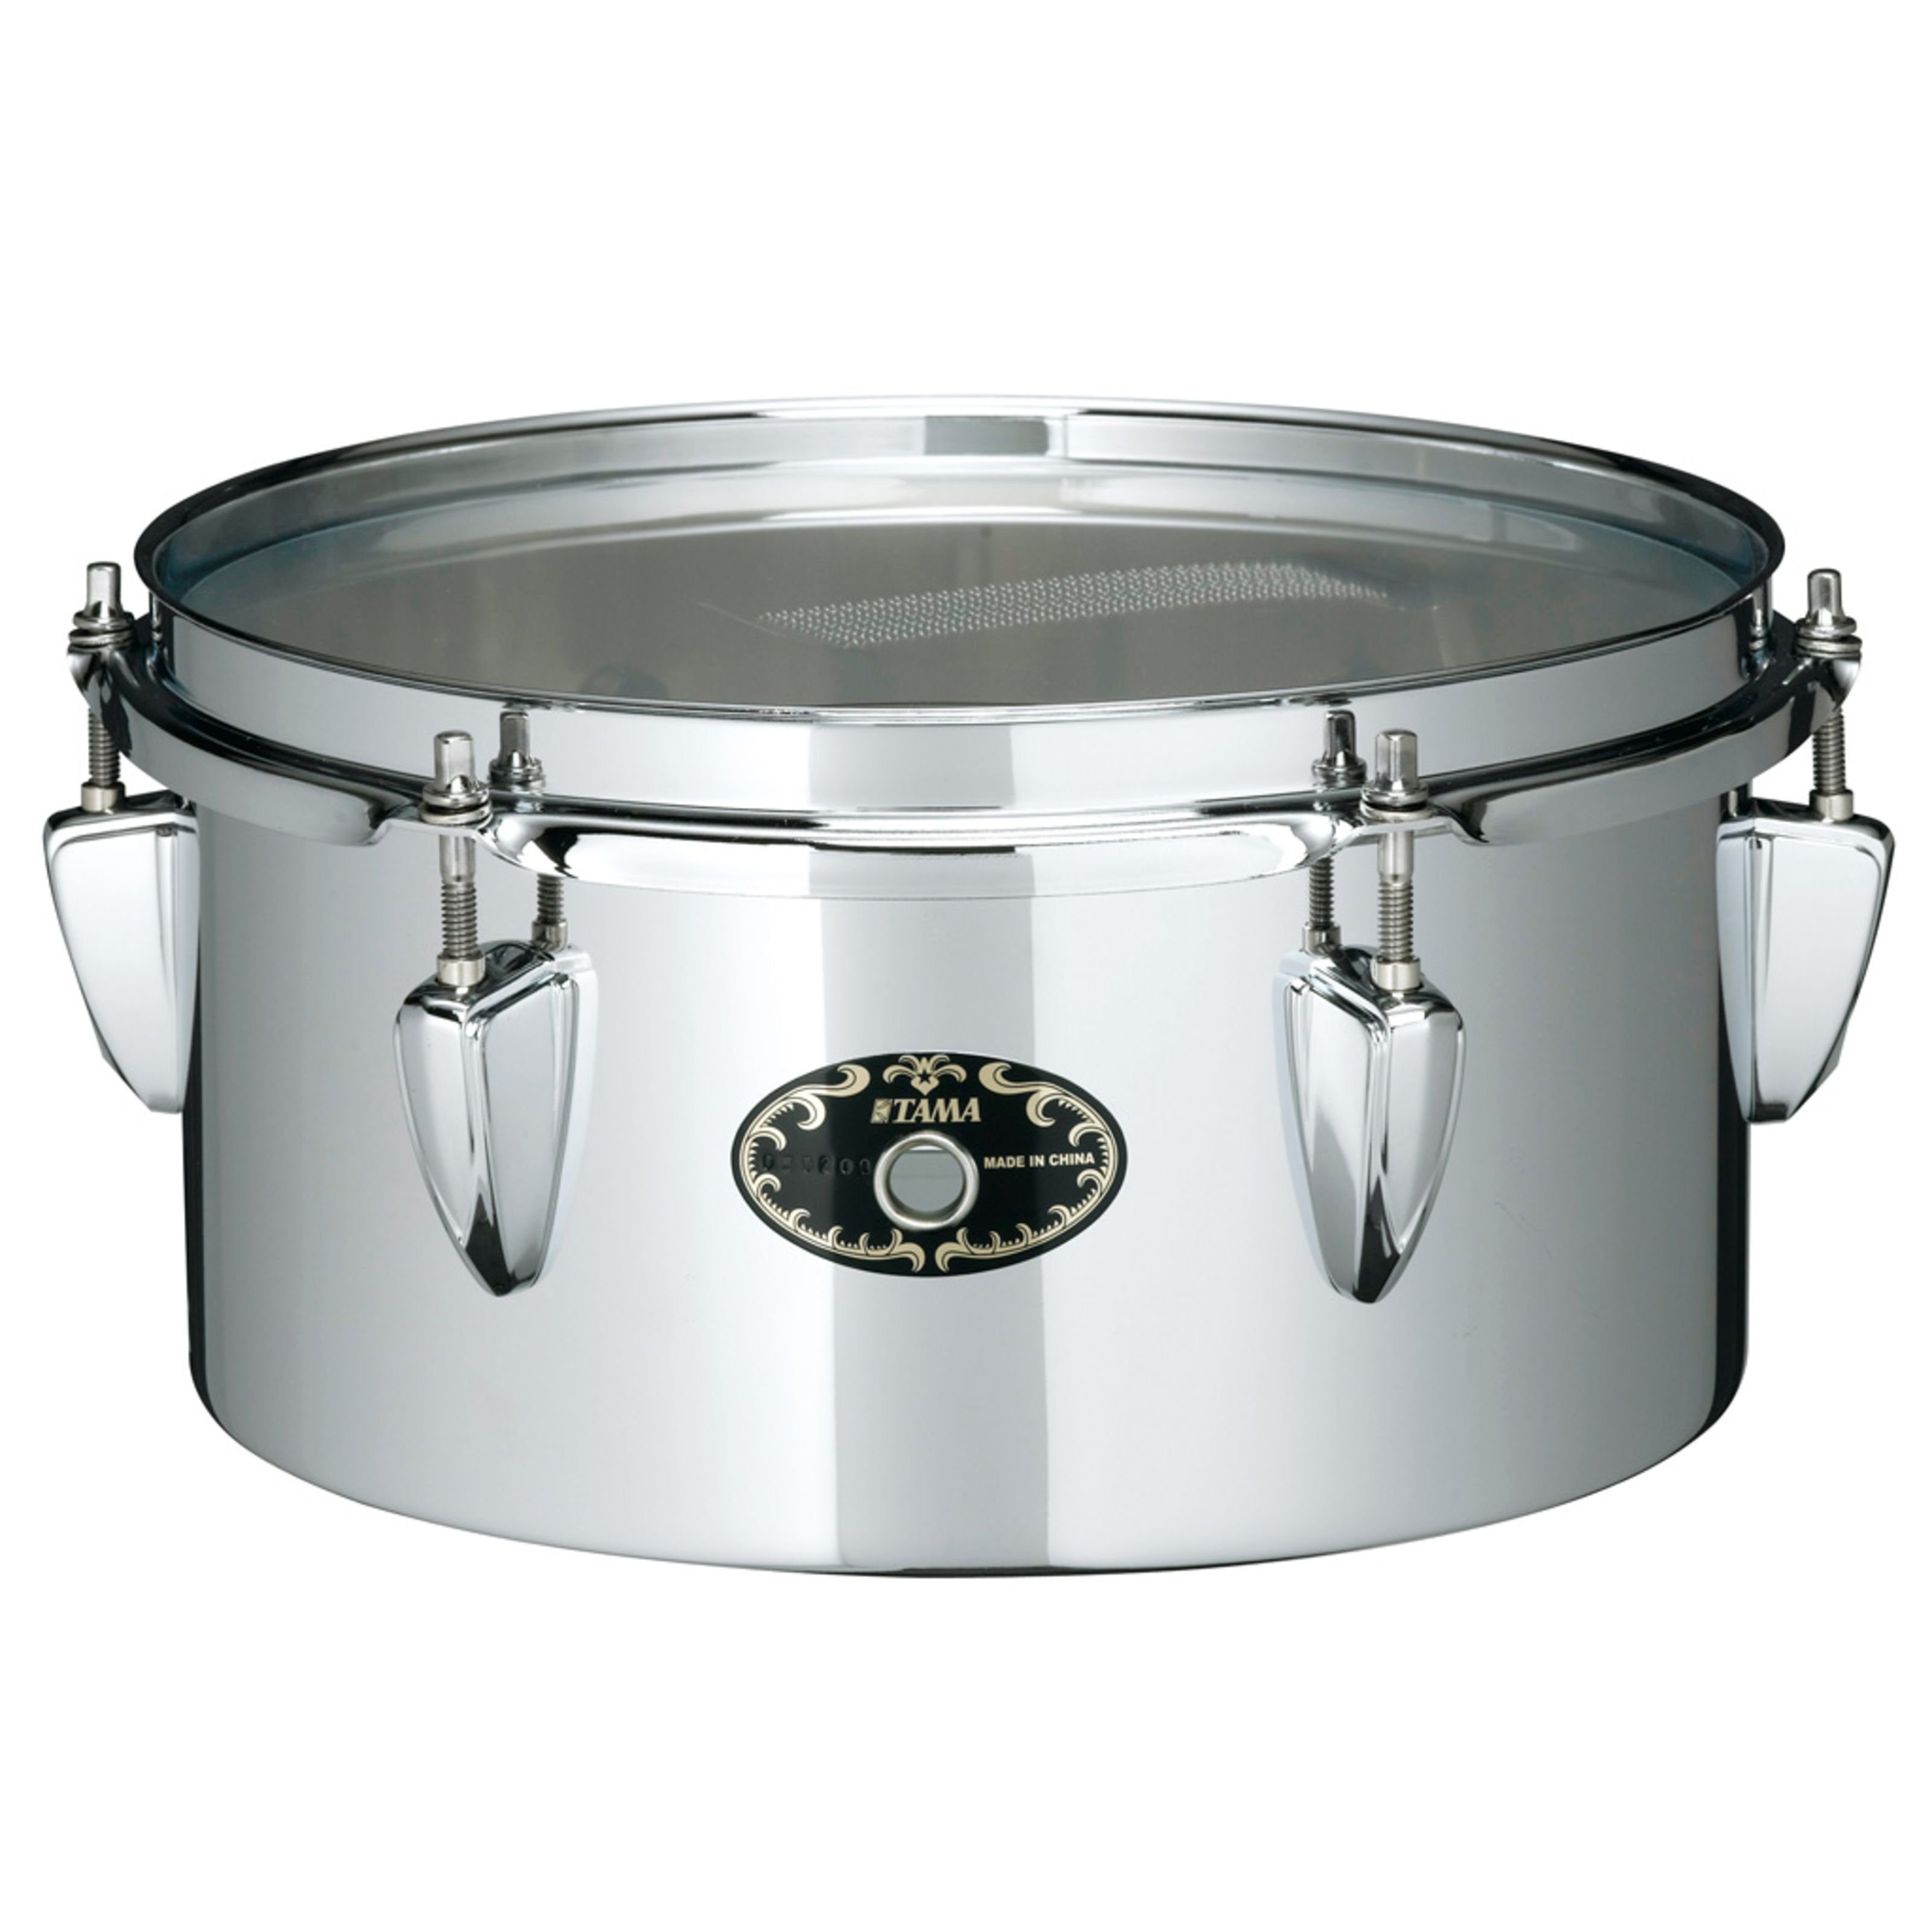 Tama Snare Drum,Mini-Tymp Snare STS105M, 10"x5", incl. clamp, Mini-Tymp Snare STS105M, 10"x5", incl. clamp - Snare Drum